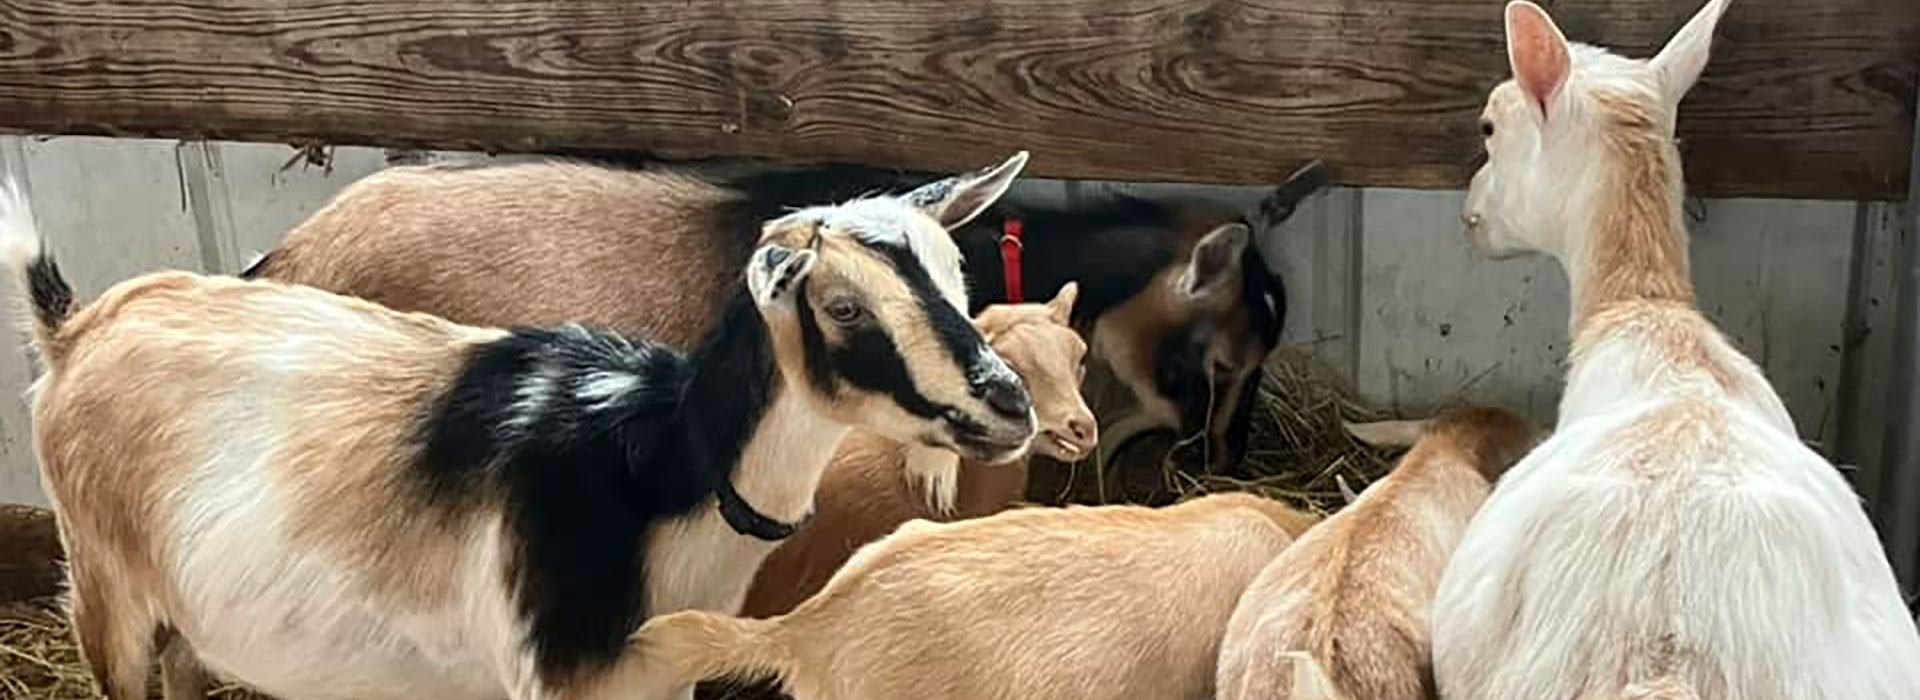 Goats during Open Farm Day at SUNY Morrisville